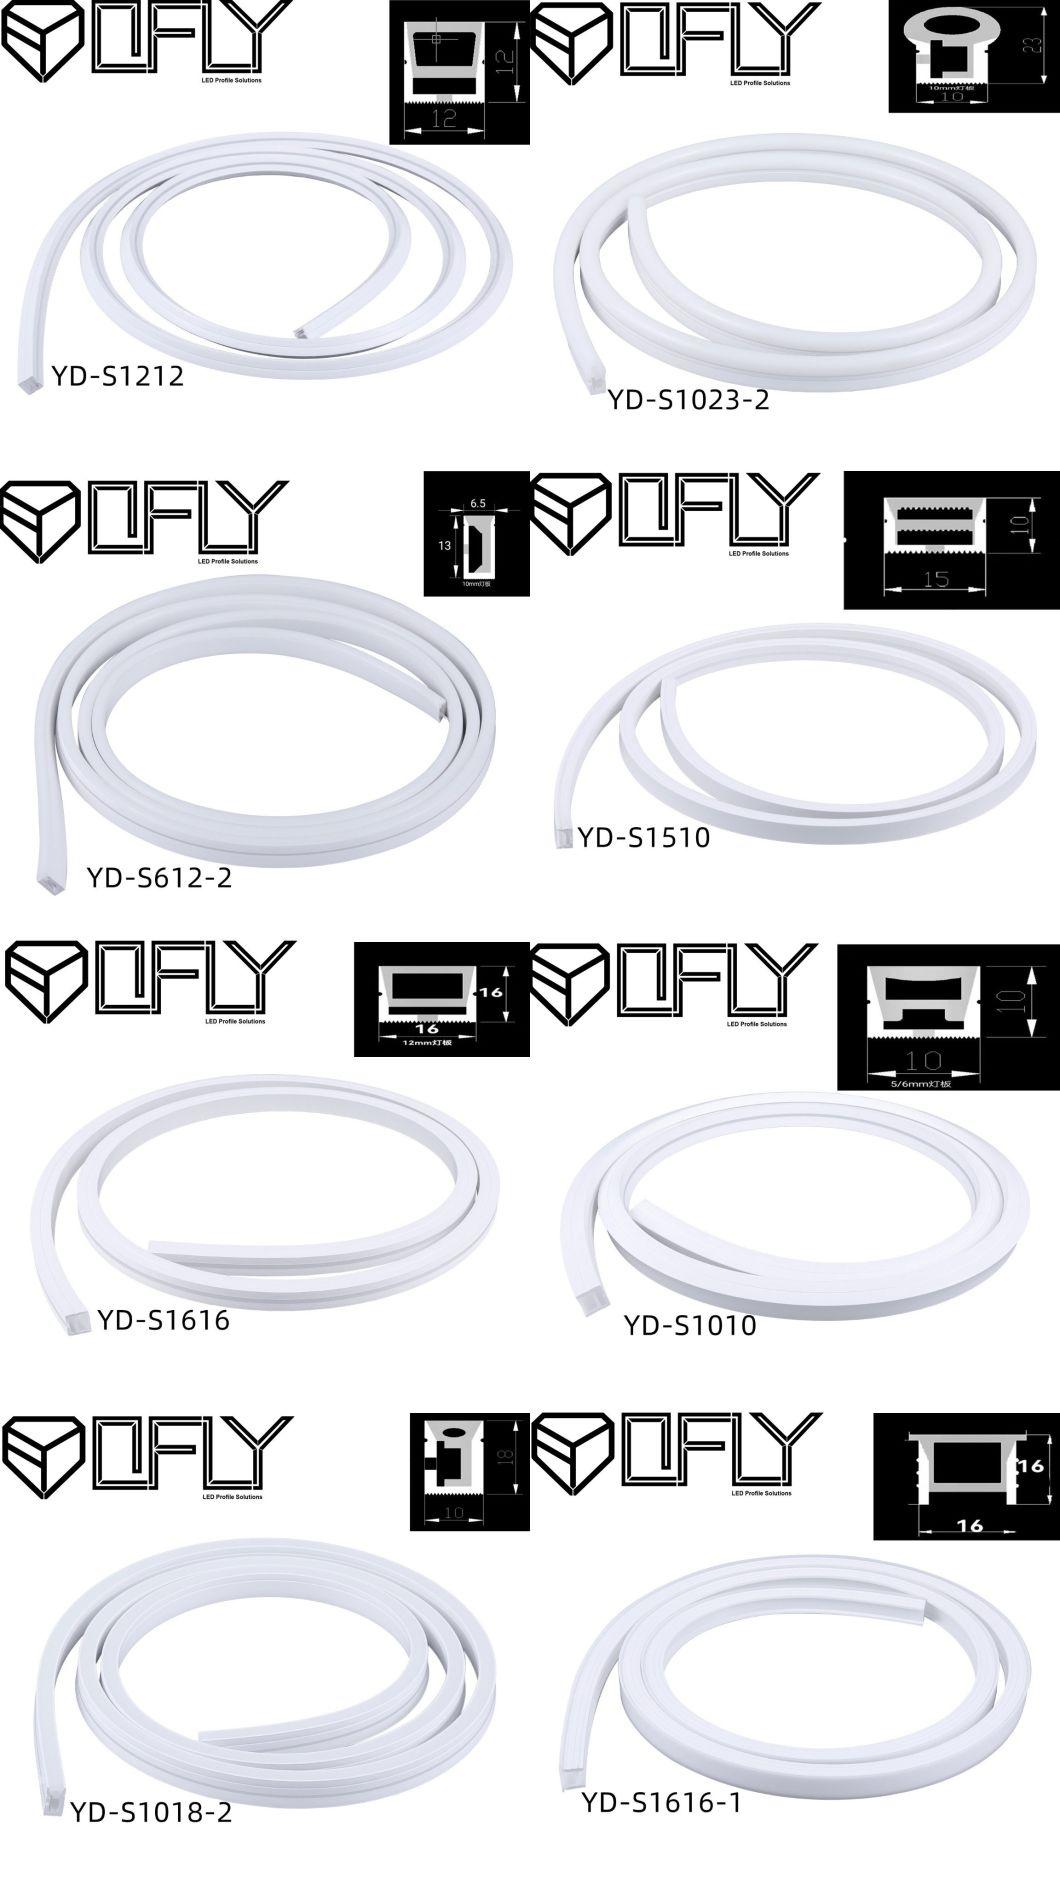 Silicone Profile for LED Strip Light Flexible Waterproof Profile Suitable for Outdoor 50*20